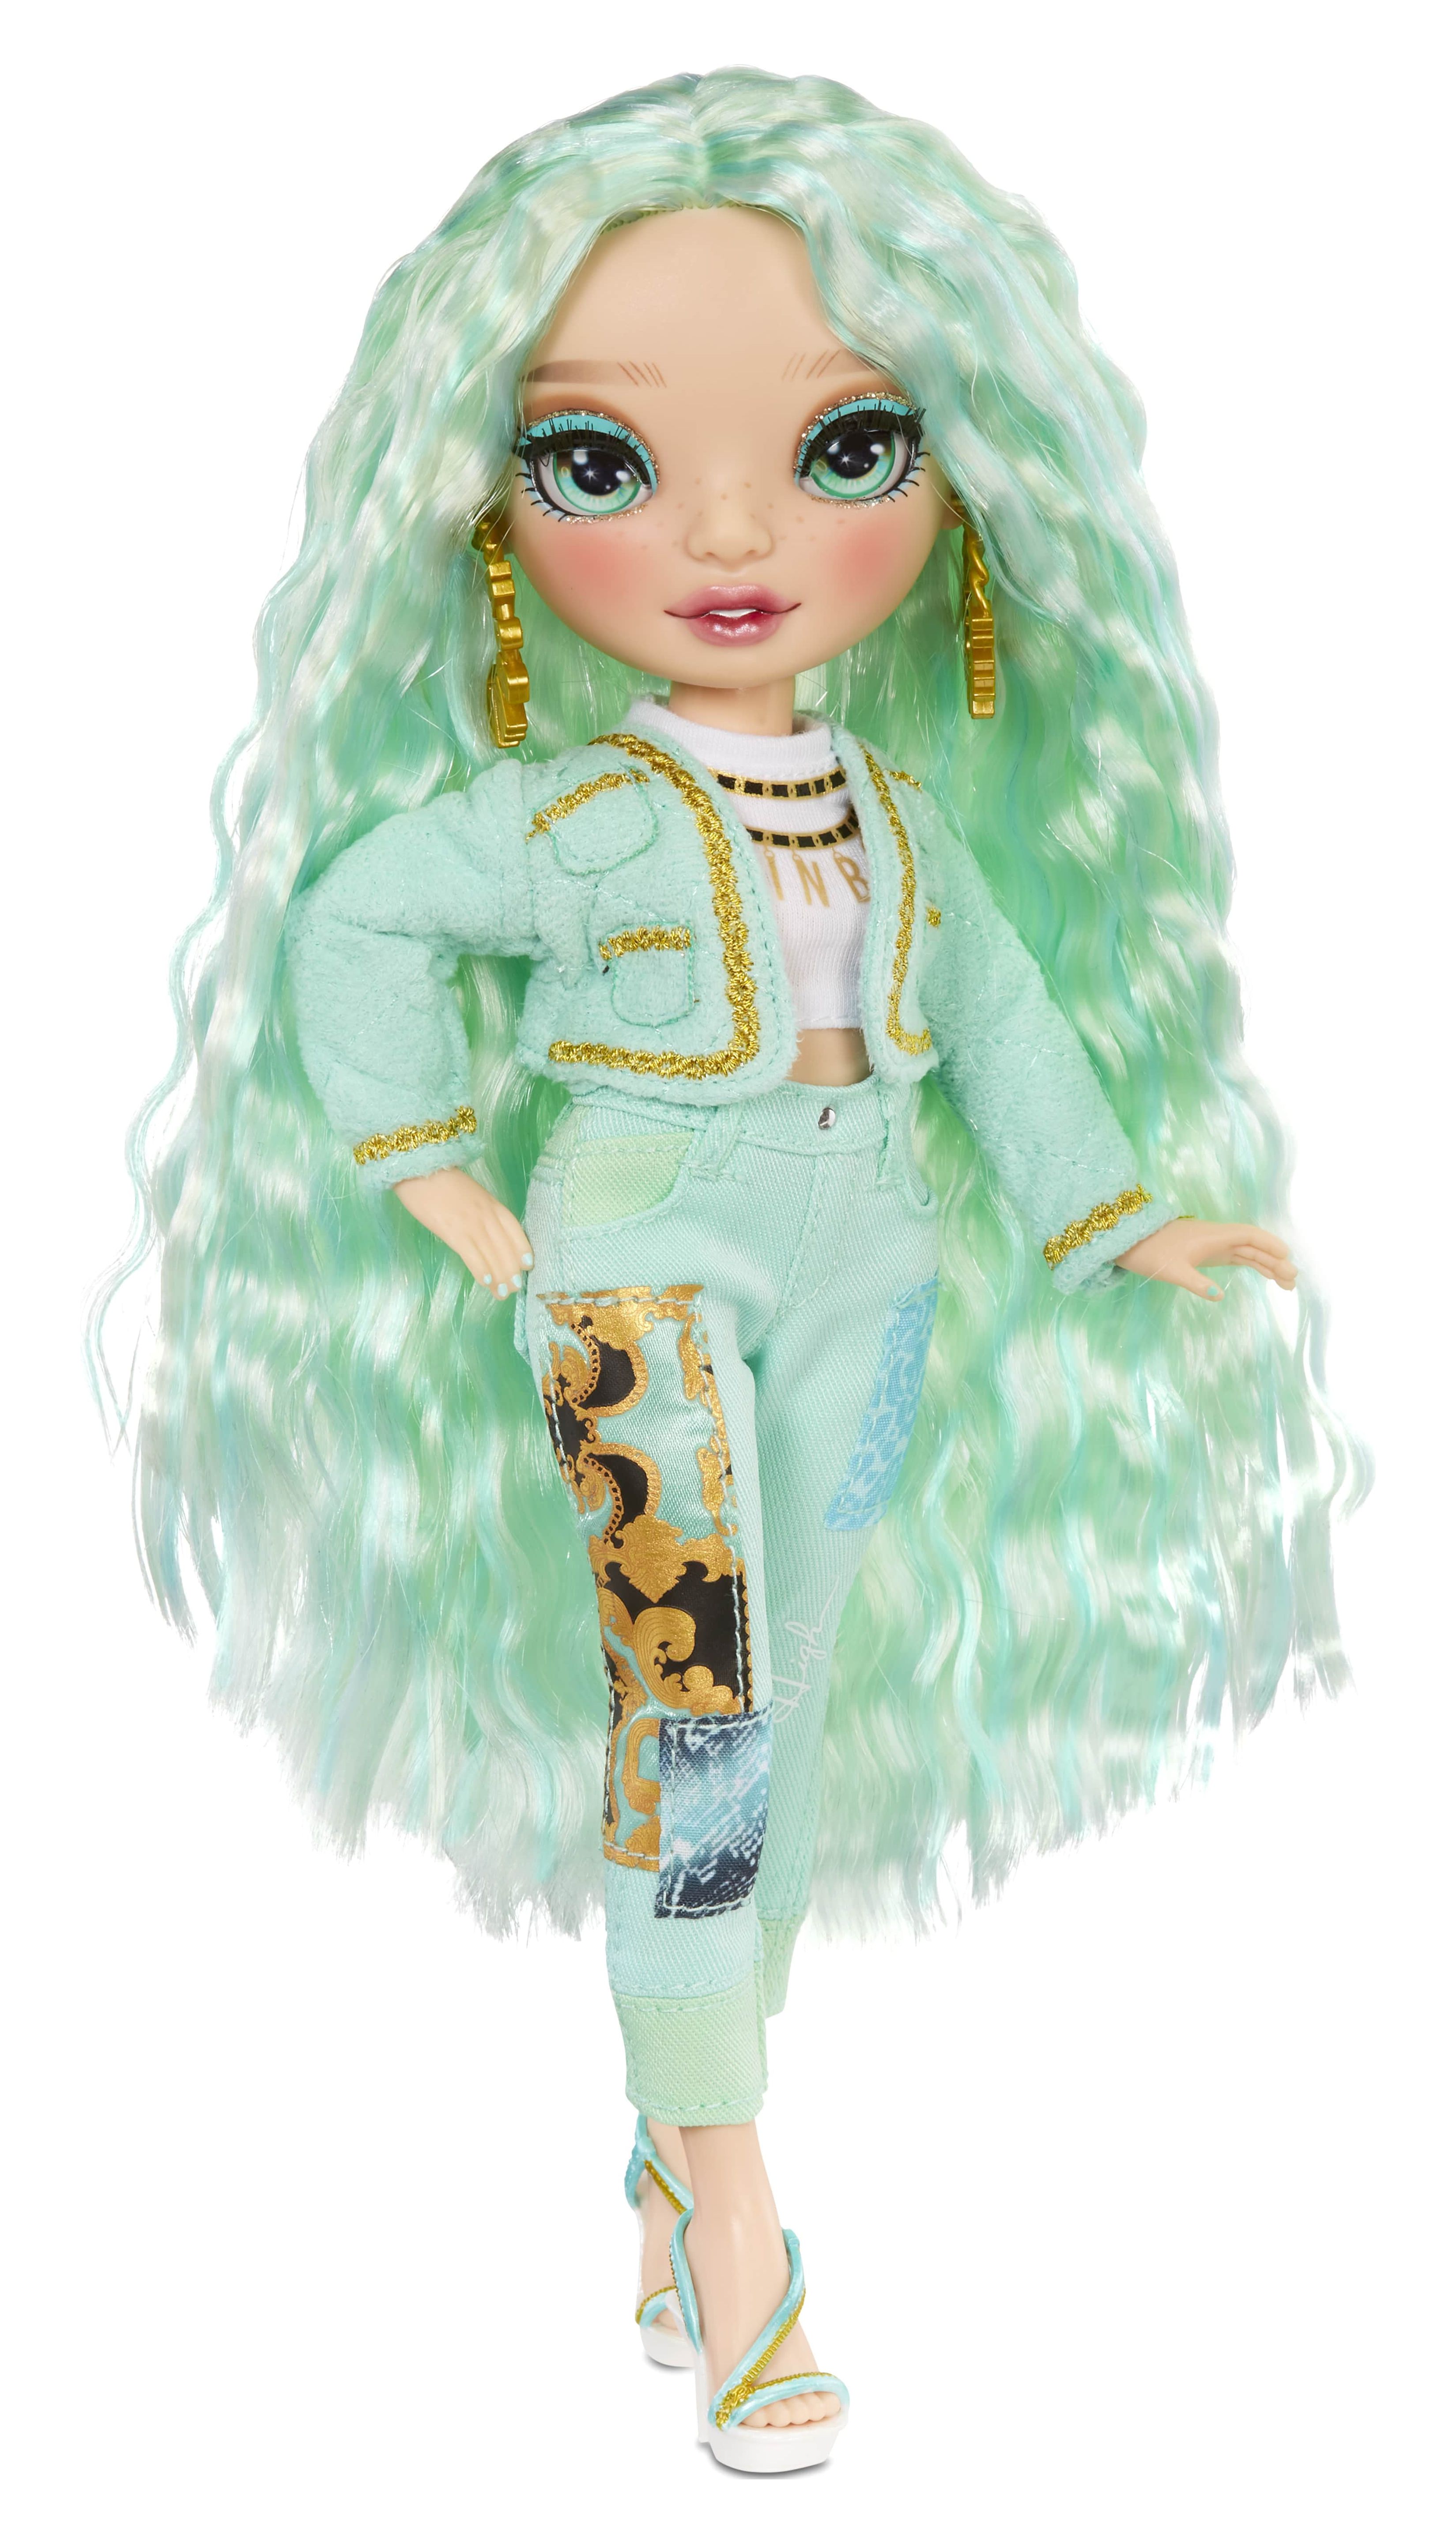 Rainbow High Daphne Minton – Mint (Light Green) Fashion Doll With 2 Outfits To Mix & Match And Doll Accessories, Great Gift And Toy for Kids 6-12 Years Old - image 1 of 8